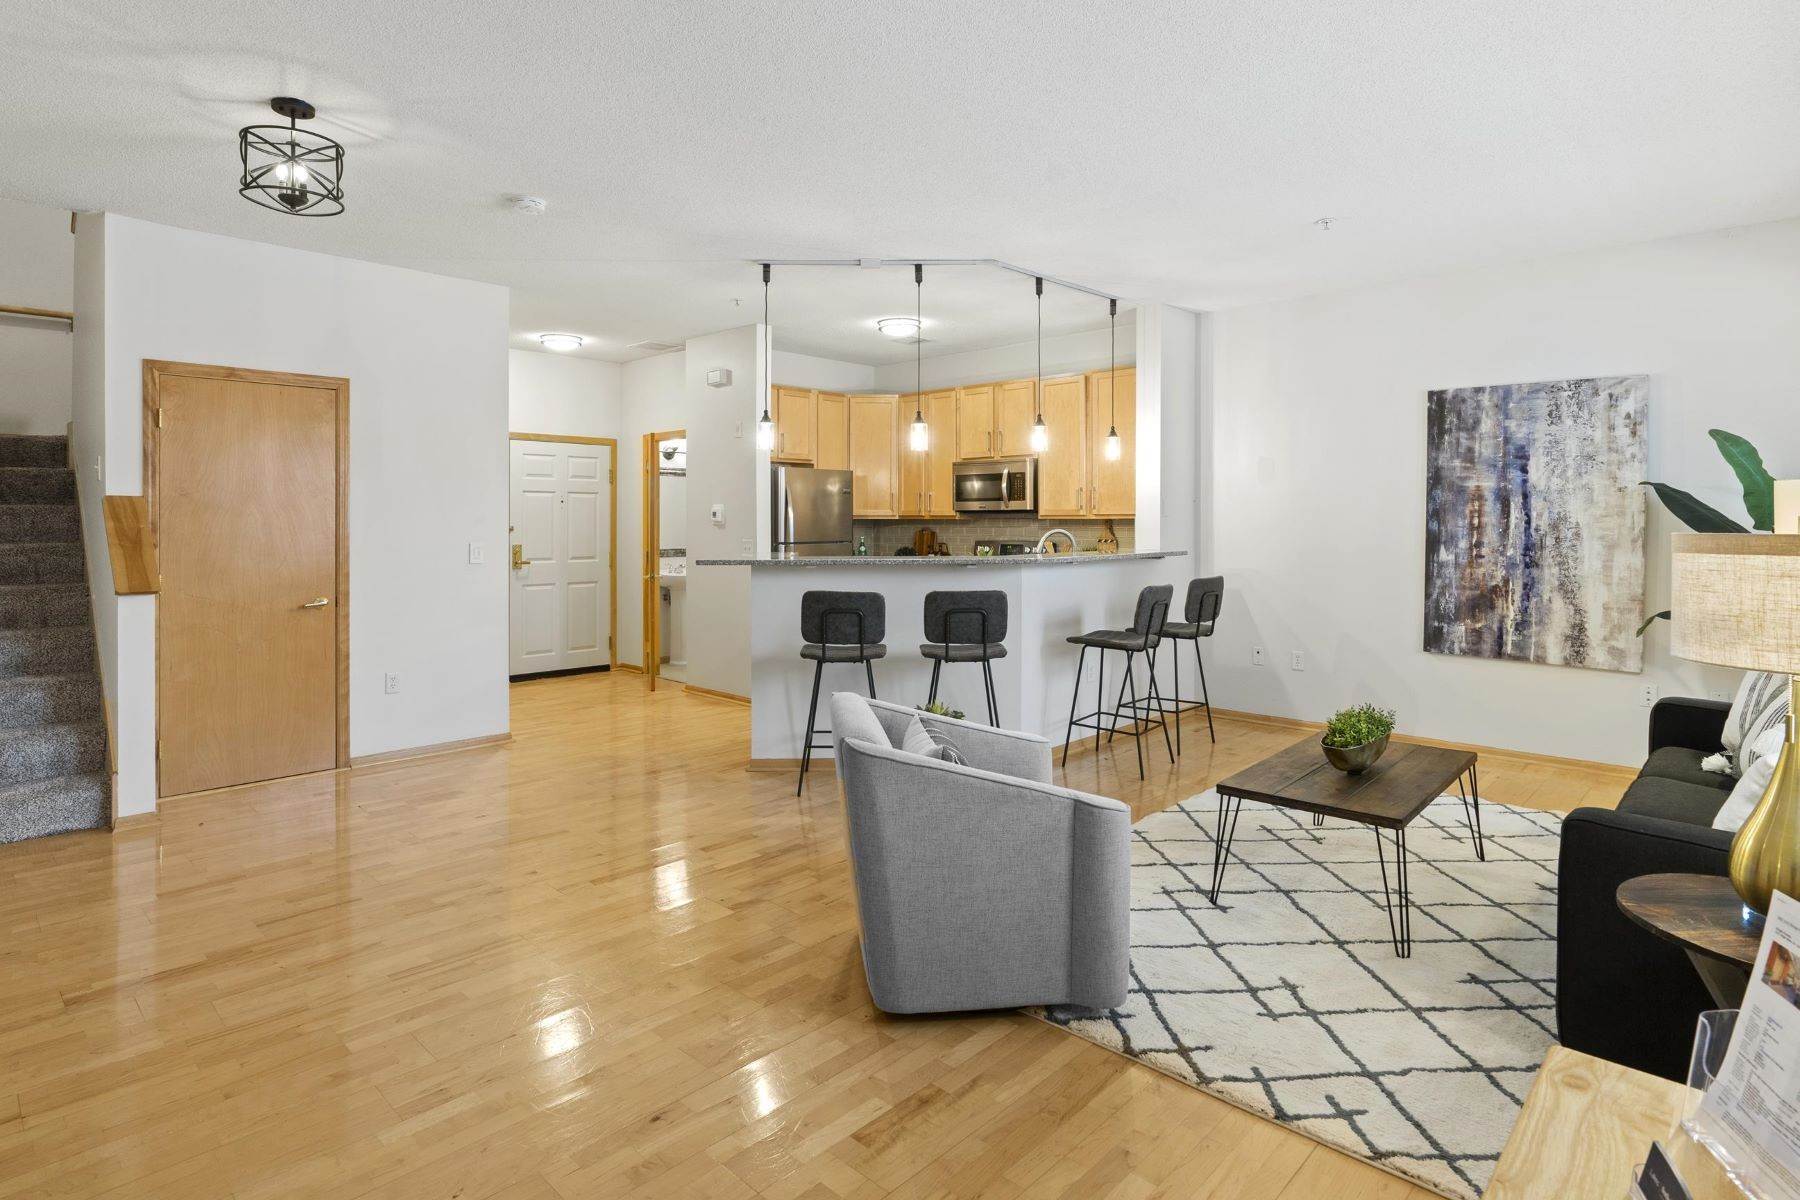 Condominiums for Sale at Fall In Love With Everything This North Loop Condo Has To Offer! 560 2nd Street N 108 Minneapolis, Minnesota 55401 United States